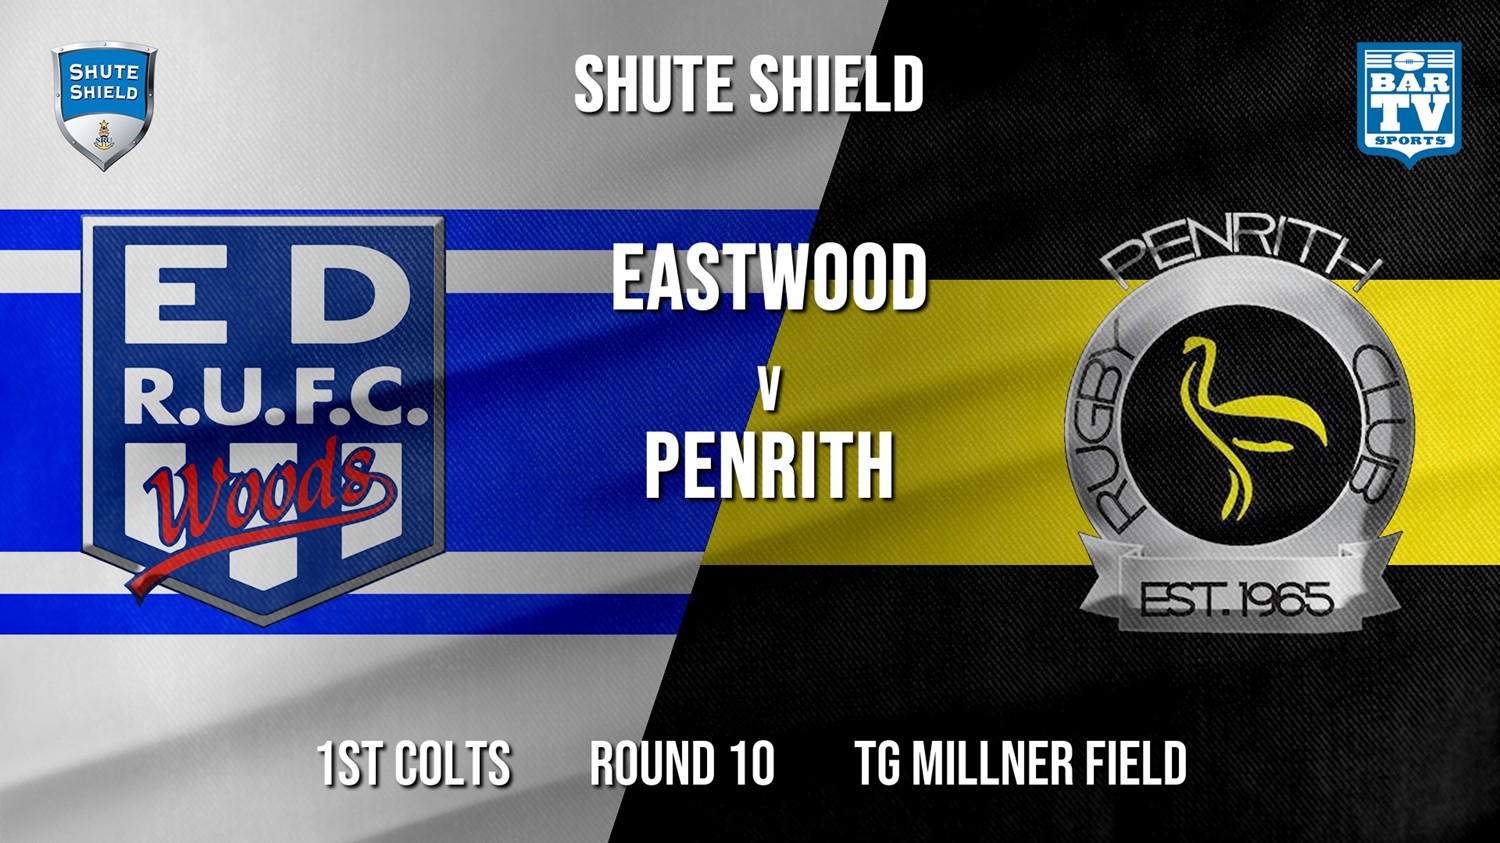 Shute Shield Round 10 - 1st Colts - Eastwood v Penrith Emus Minigame Slate Image